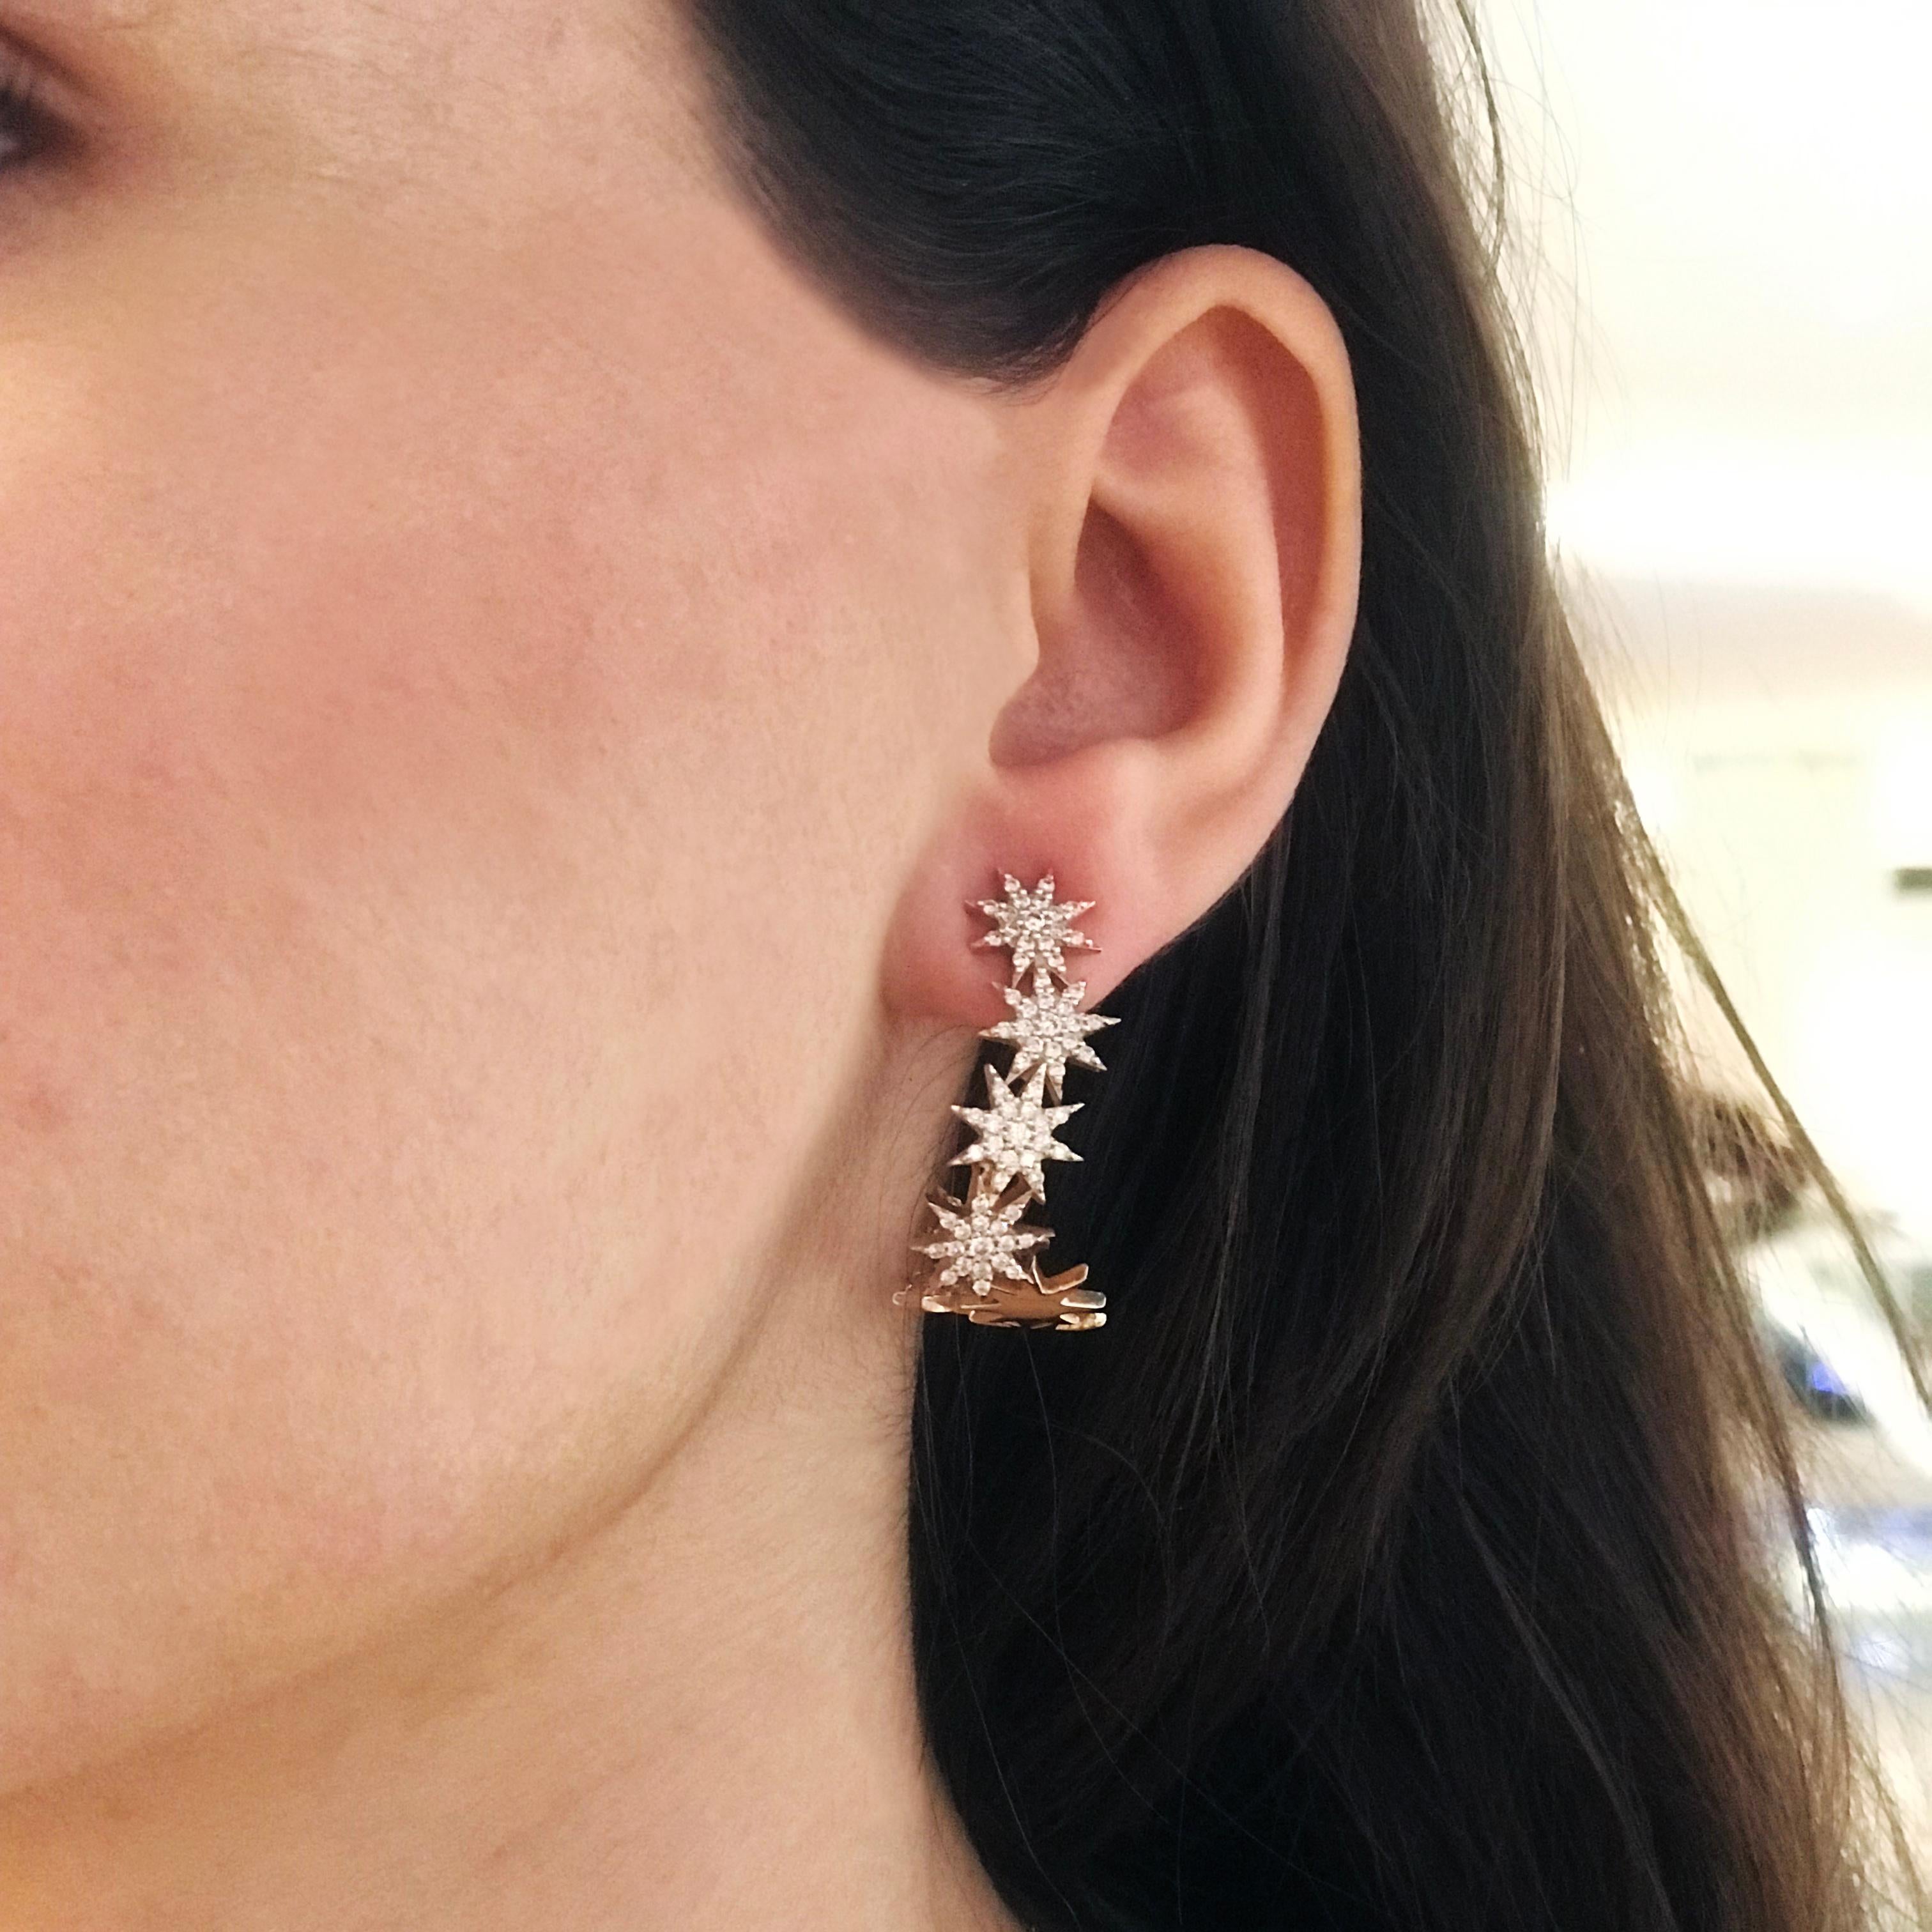 Venus Star Hoop Earrings in all white diamonds are irrevocable talismans; reminder of new beginnings, hope and inspiration. Complimenting modern and contemporary styles, they bring forth stardust when it comes to brightening a simple yet elegant